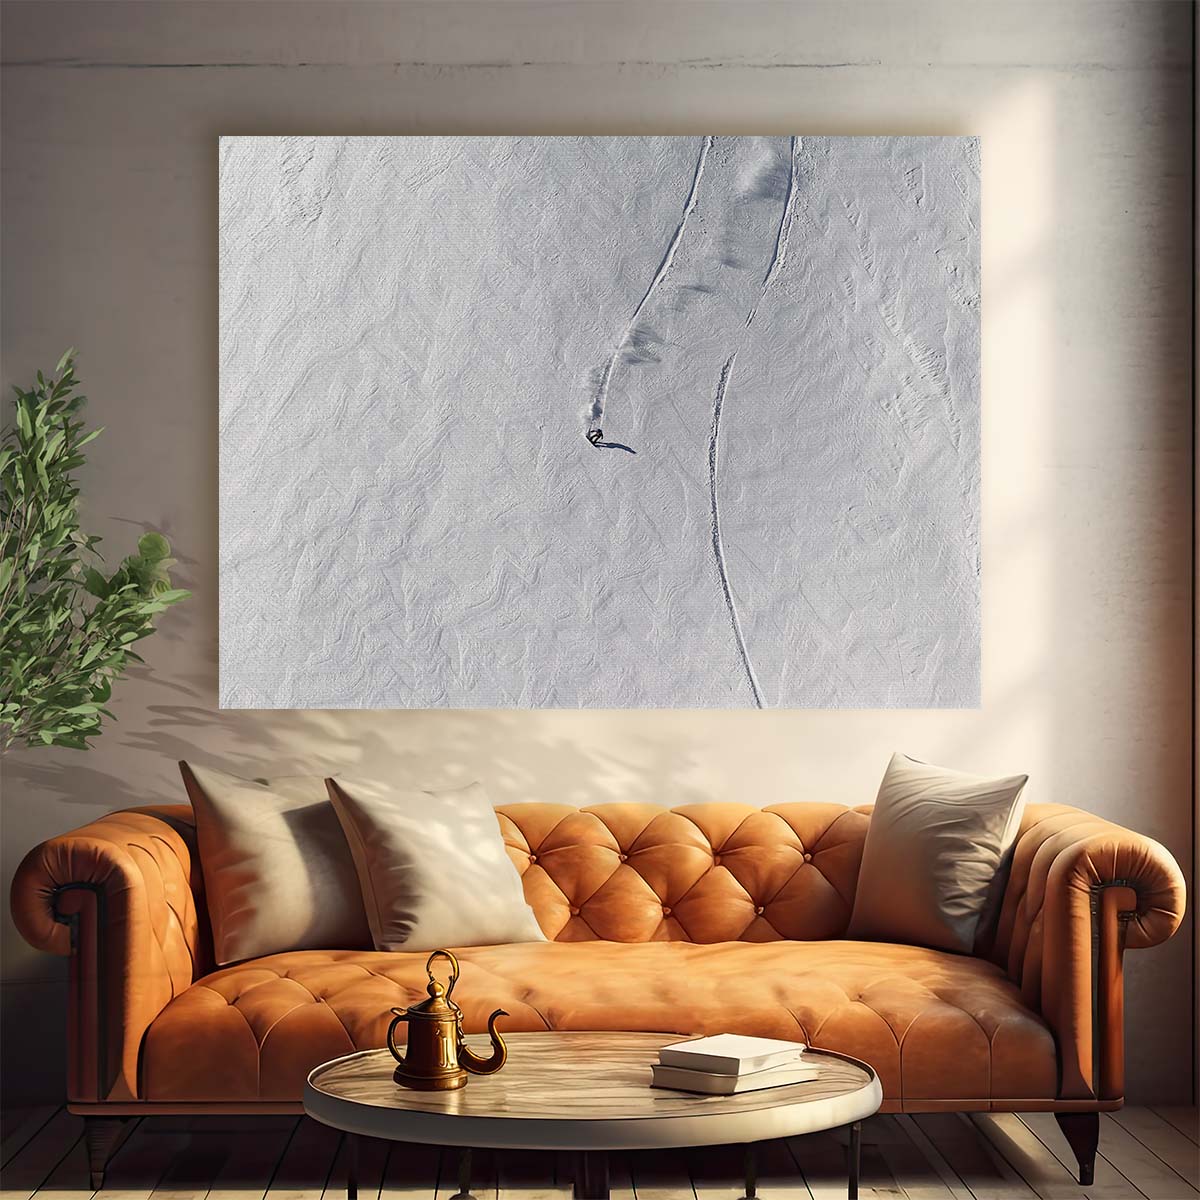 Extreme Snowboarding Adventure Monochrome Wall Art by Luxuriance Designs. Made in USA.